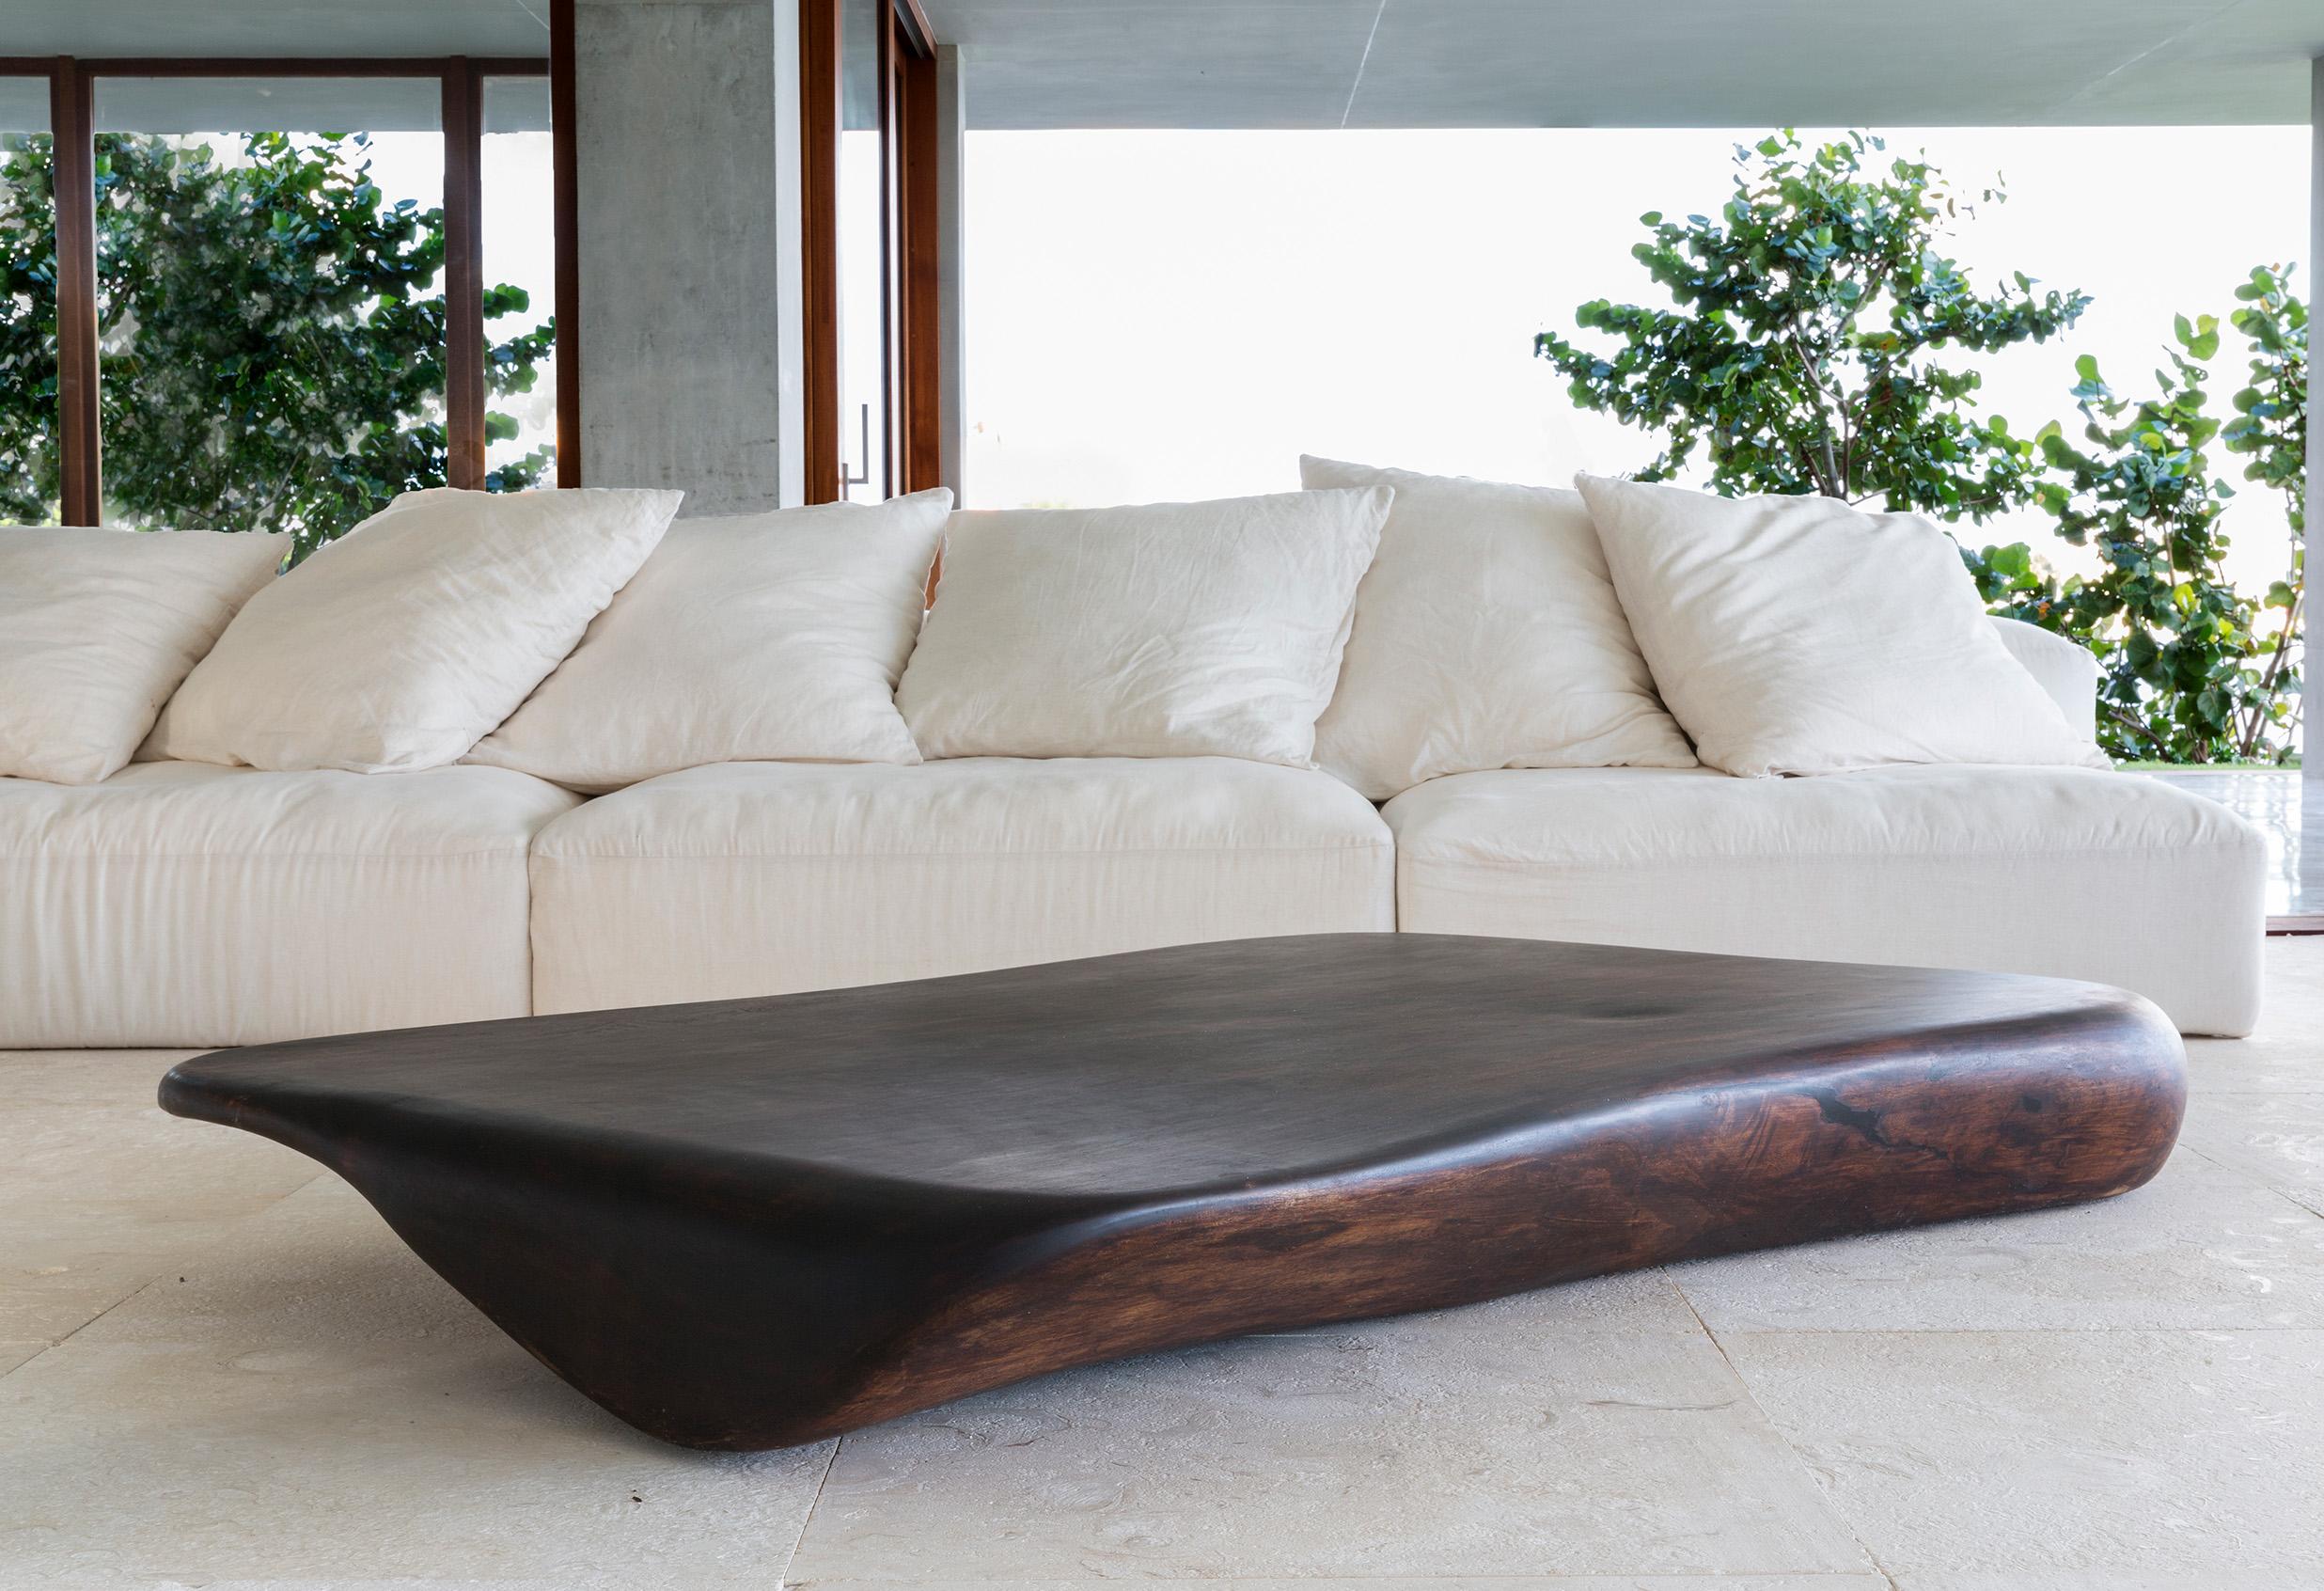 Balinese Freeform Wood Coffee Table by CEU Studio, Represented by Tuleste Factory For Sale